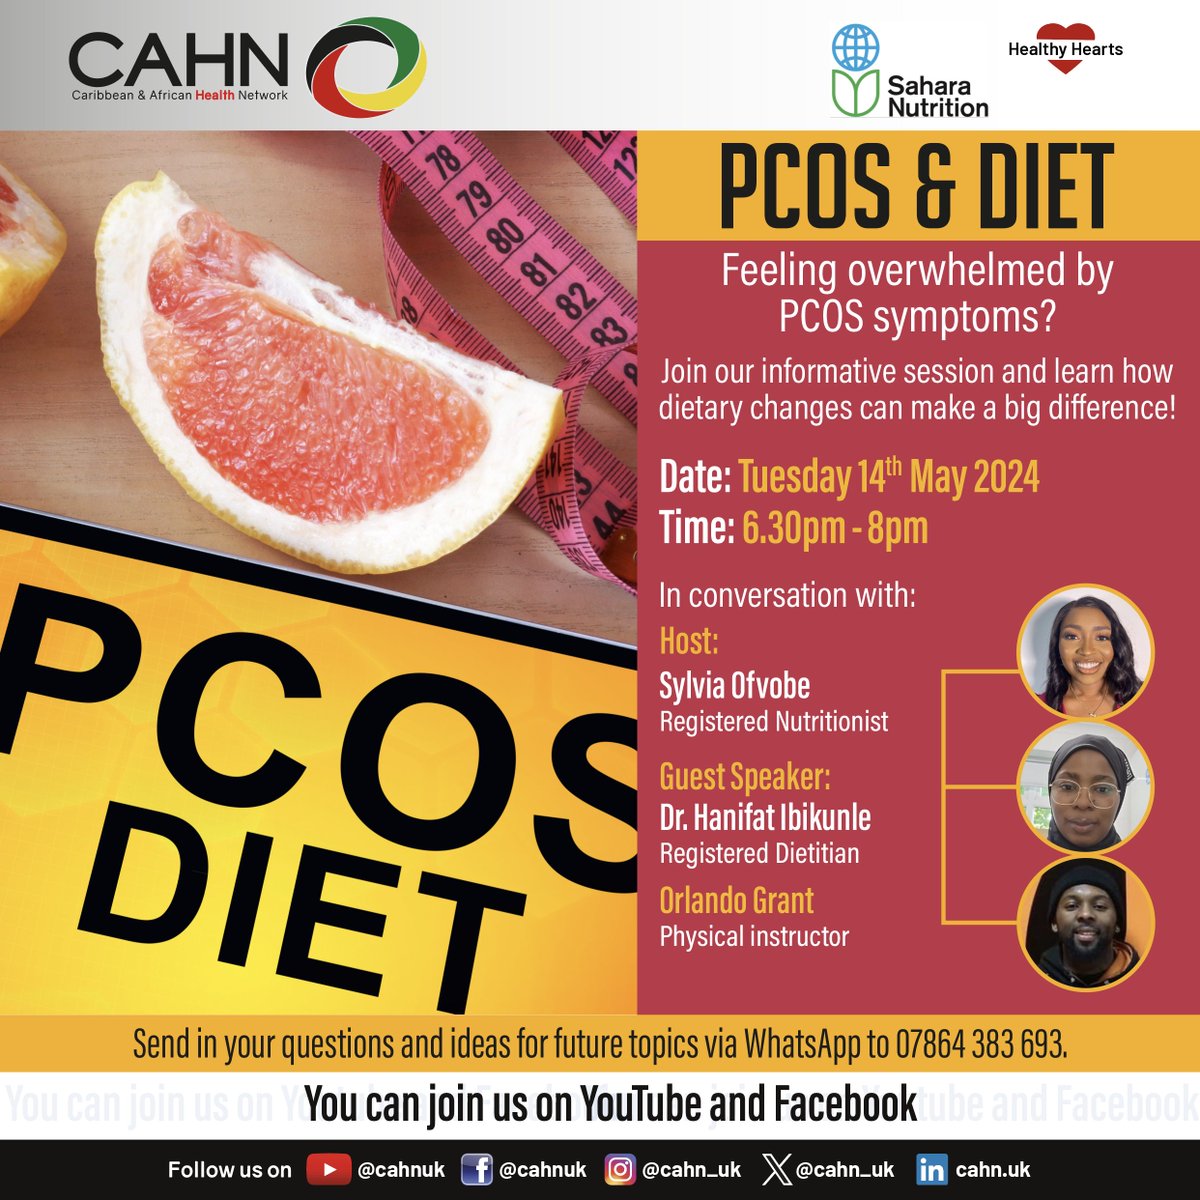 PCOS affects 10% of women in the UK, and is even more common in Black women. Symptoms include excess hair growth, irregular periods & infertility issues changing your diet may help change the story! Find out more in #HealthyHearts on Tues. Sign up now: portal.cahn.org.uk/healthyhearts